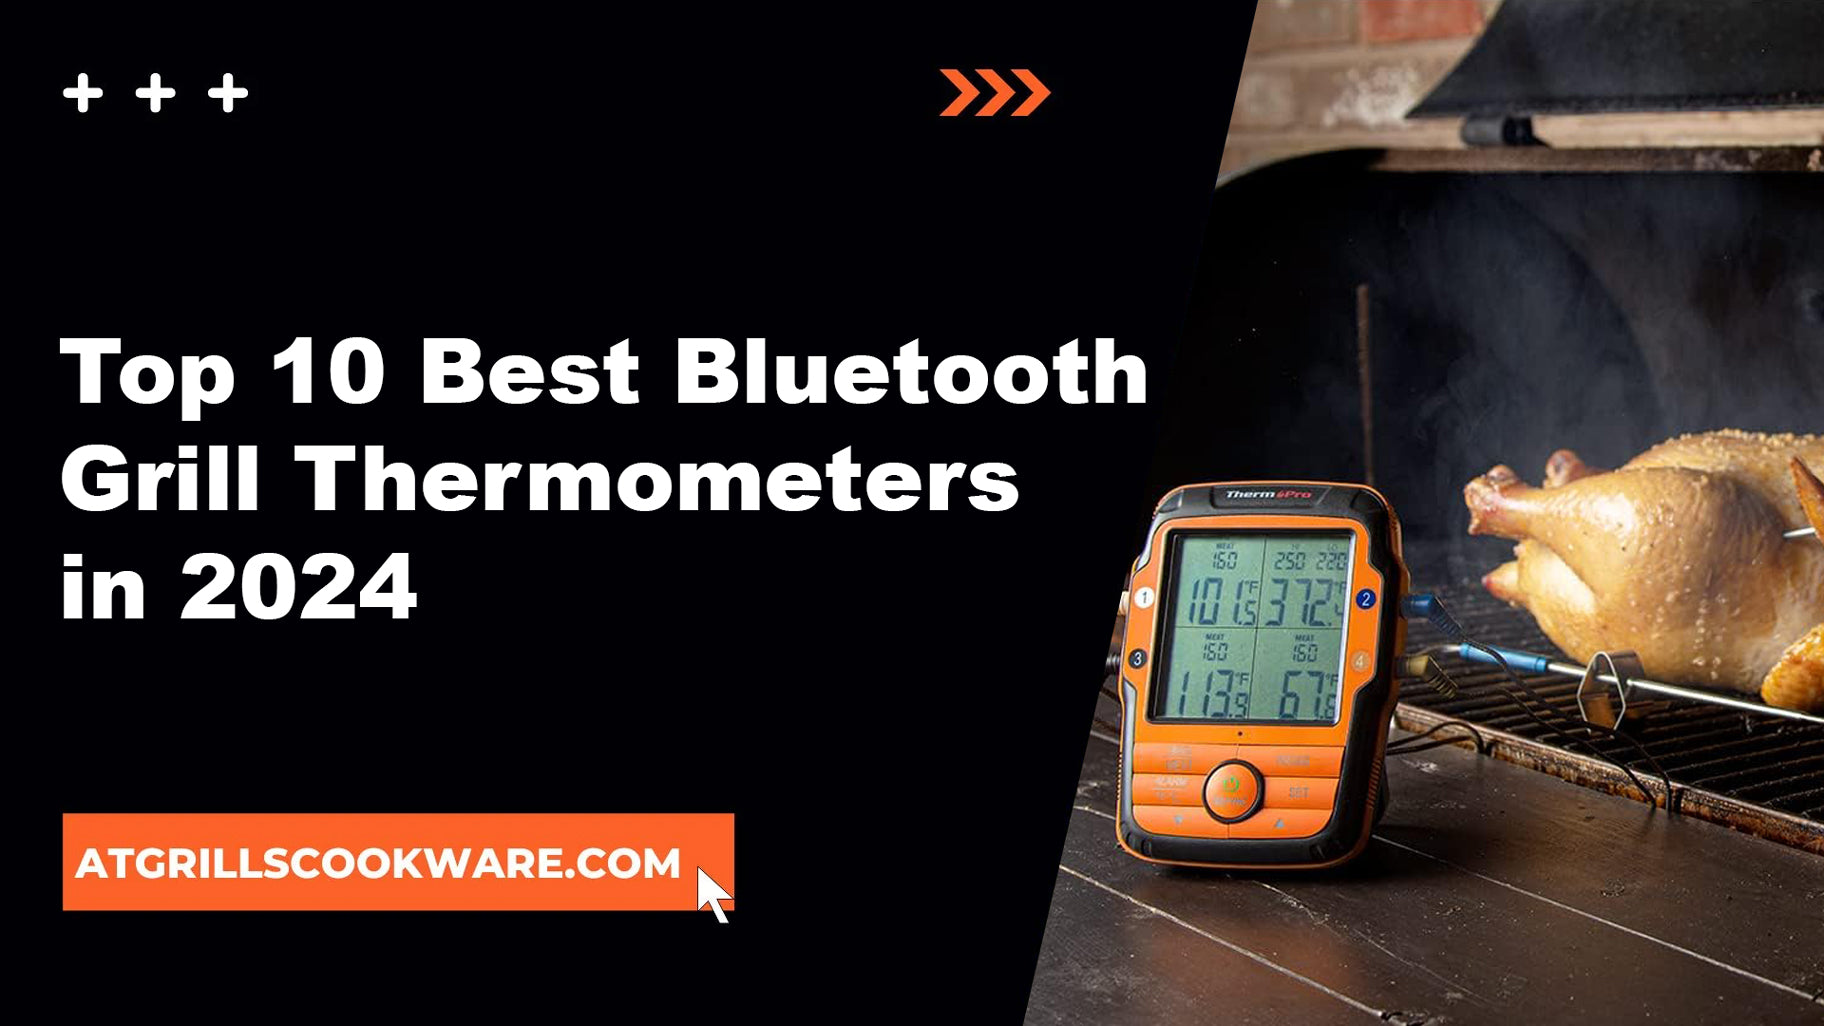 Top 10 Best Bluetooth Grill Thermometers in 2024